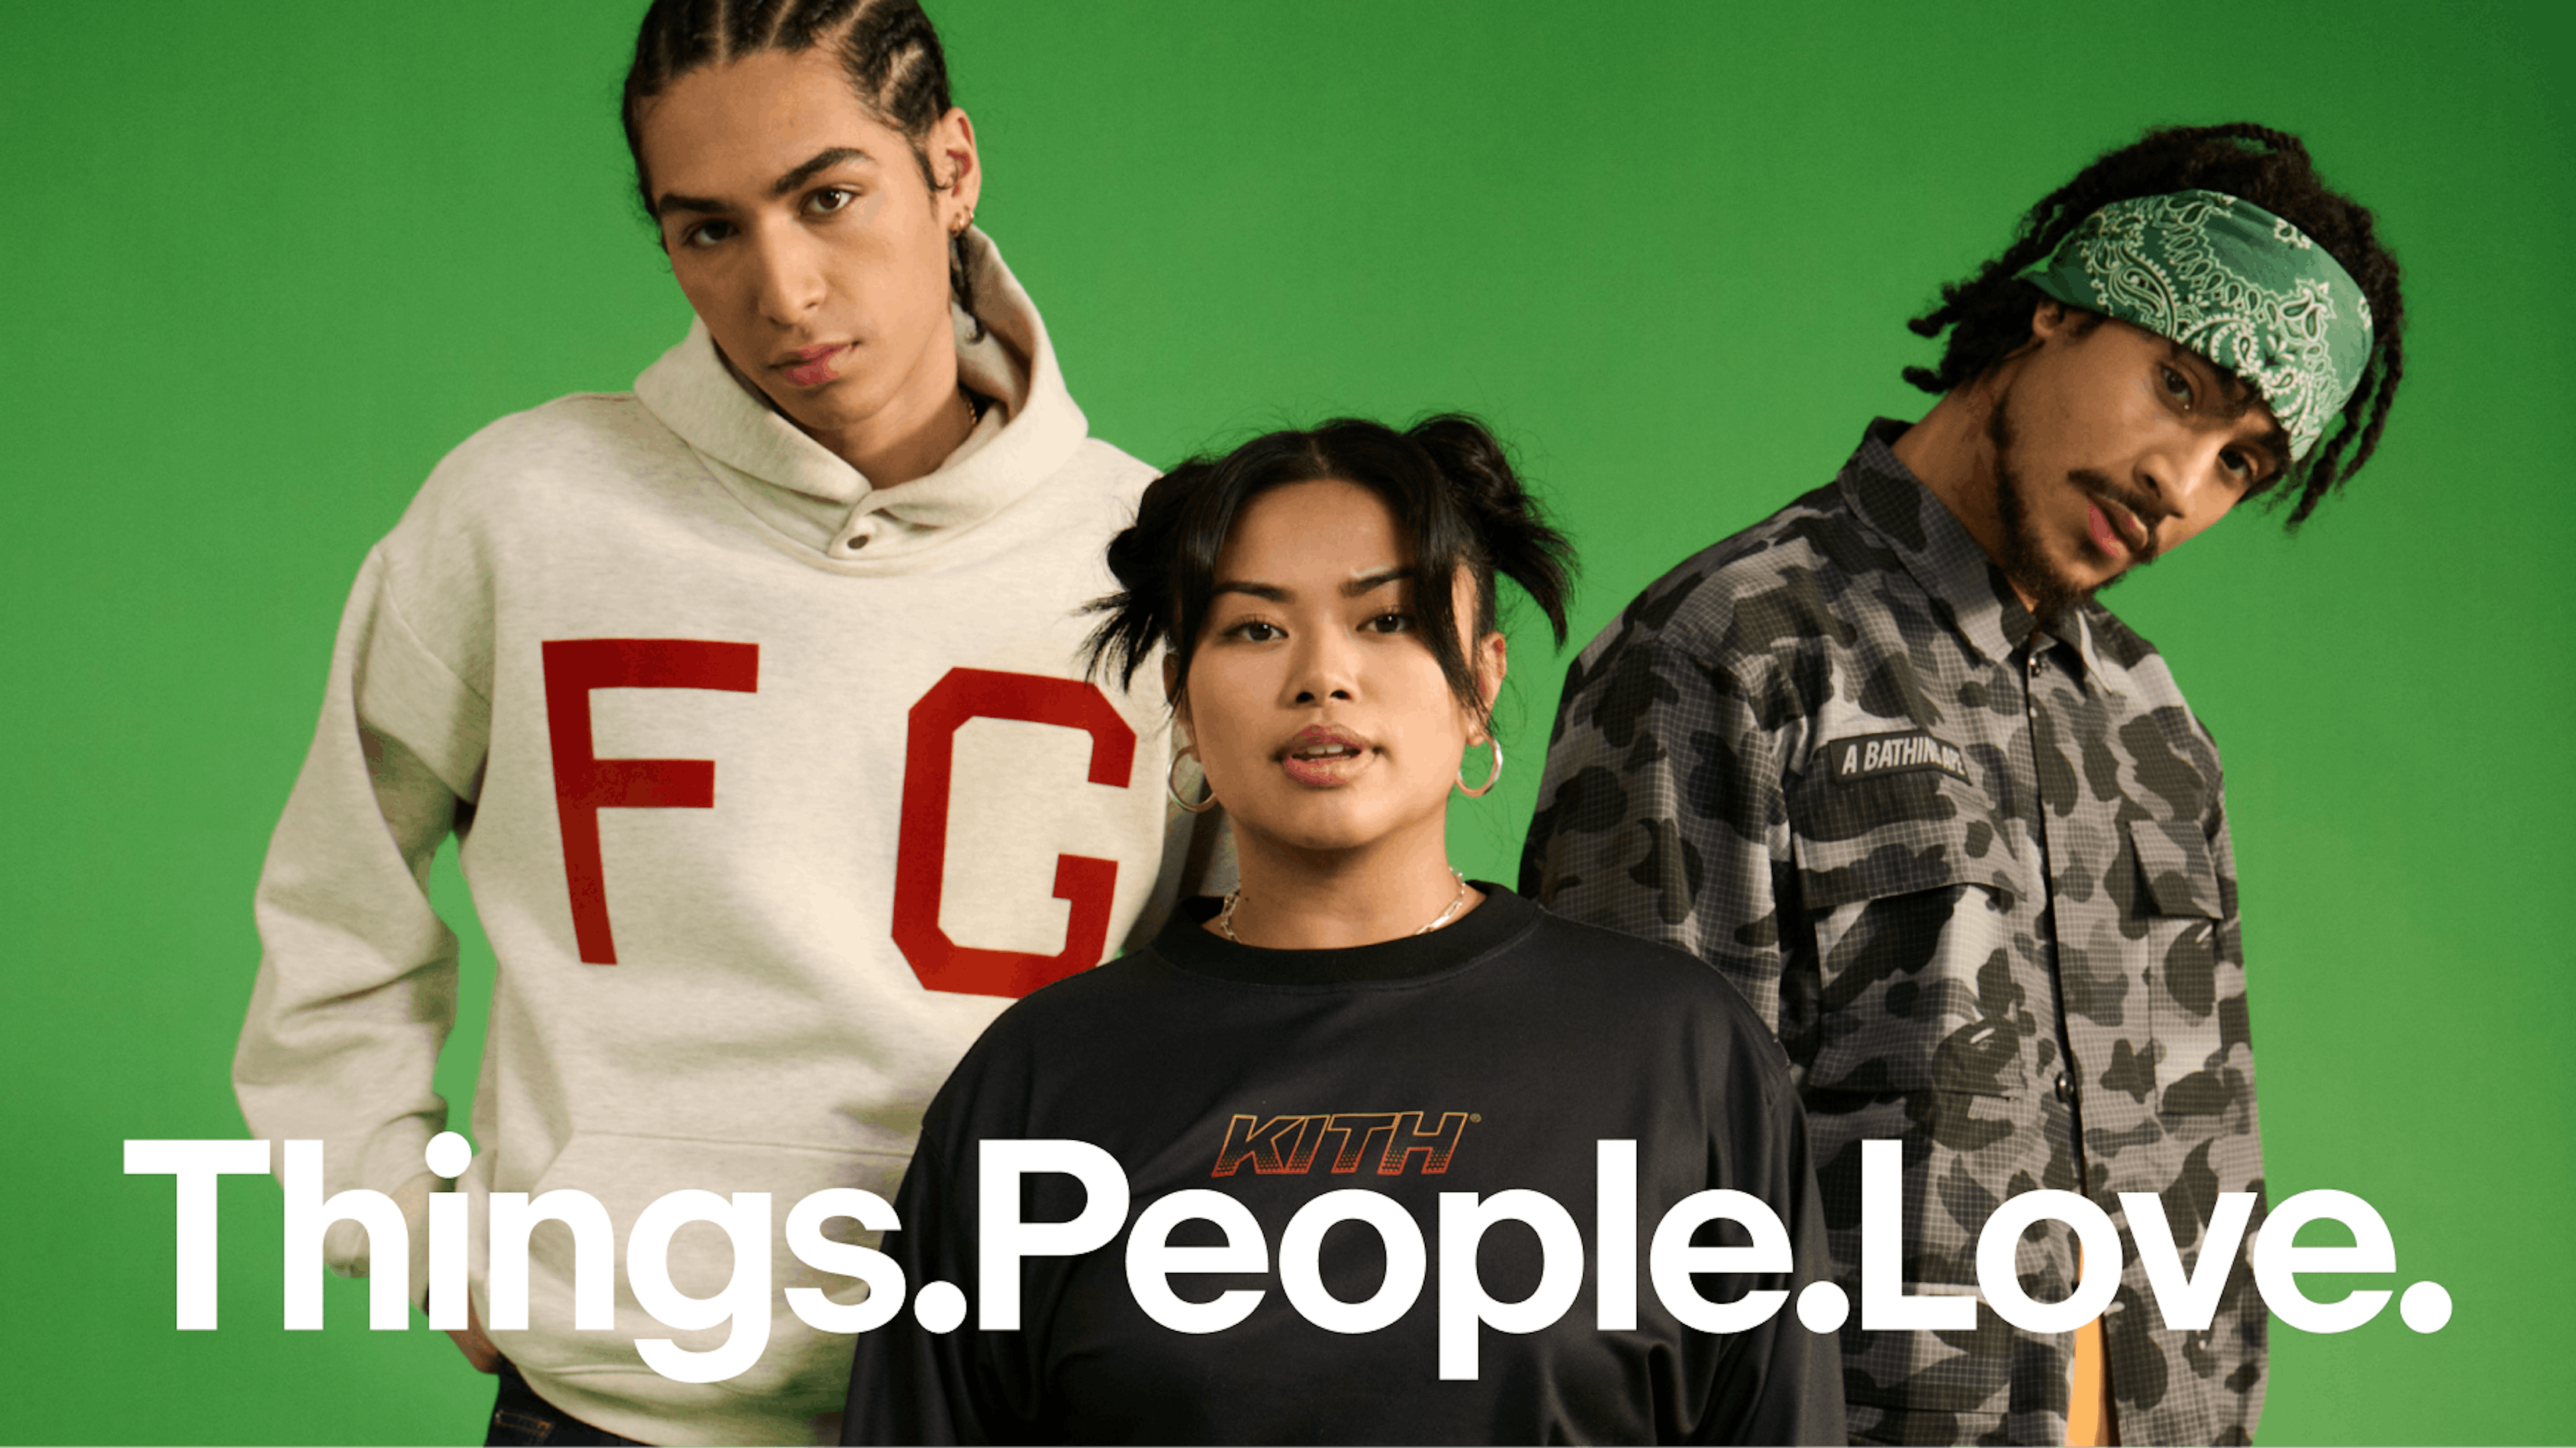 Three people standing in front of a green background with the tagline “Things.People.Love.” displayed prominently across the bottom.